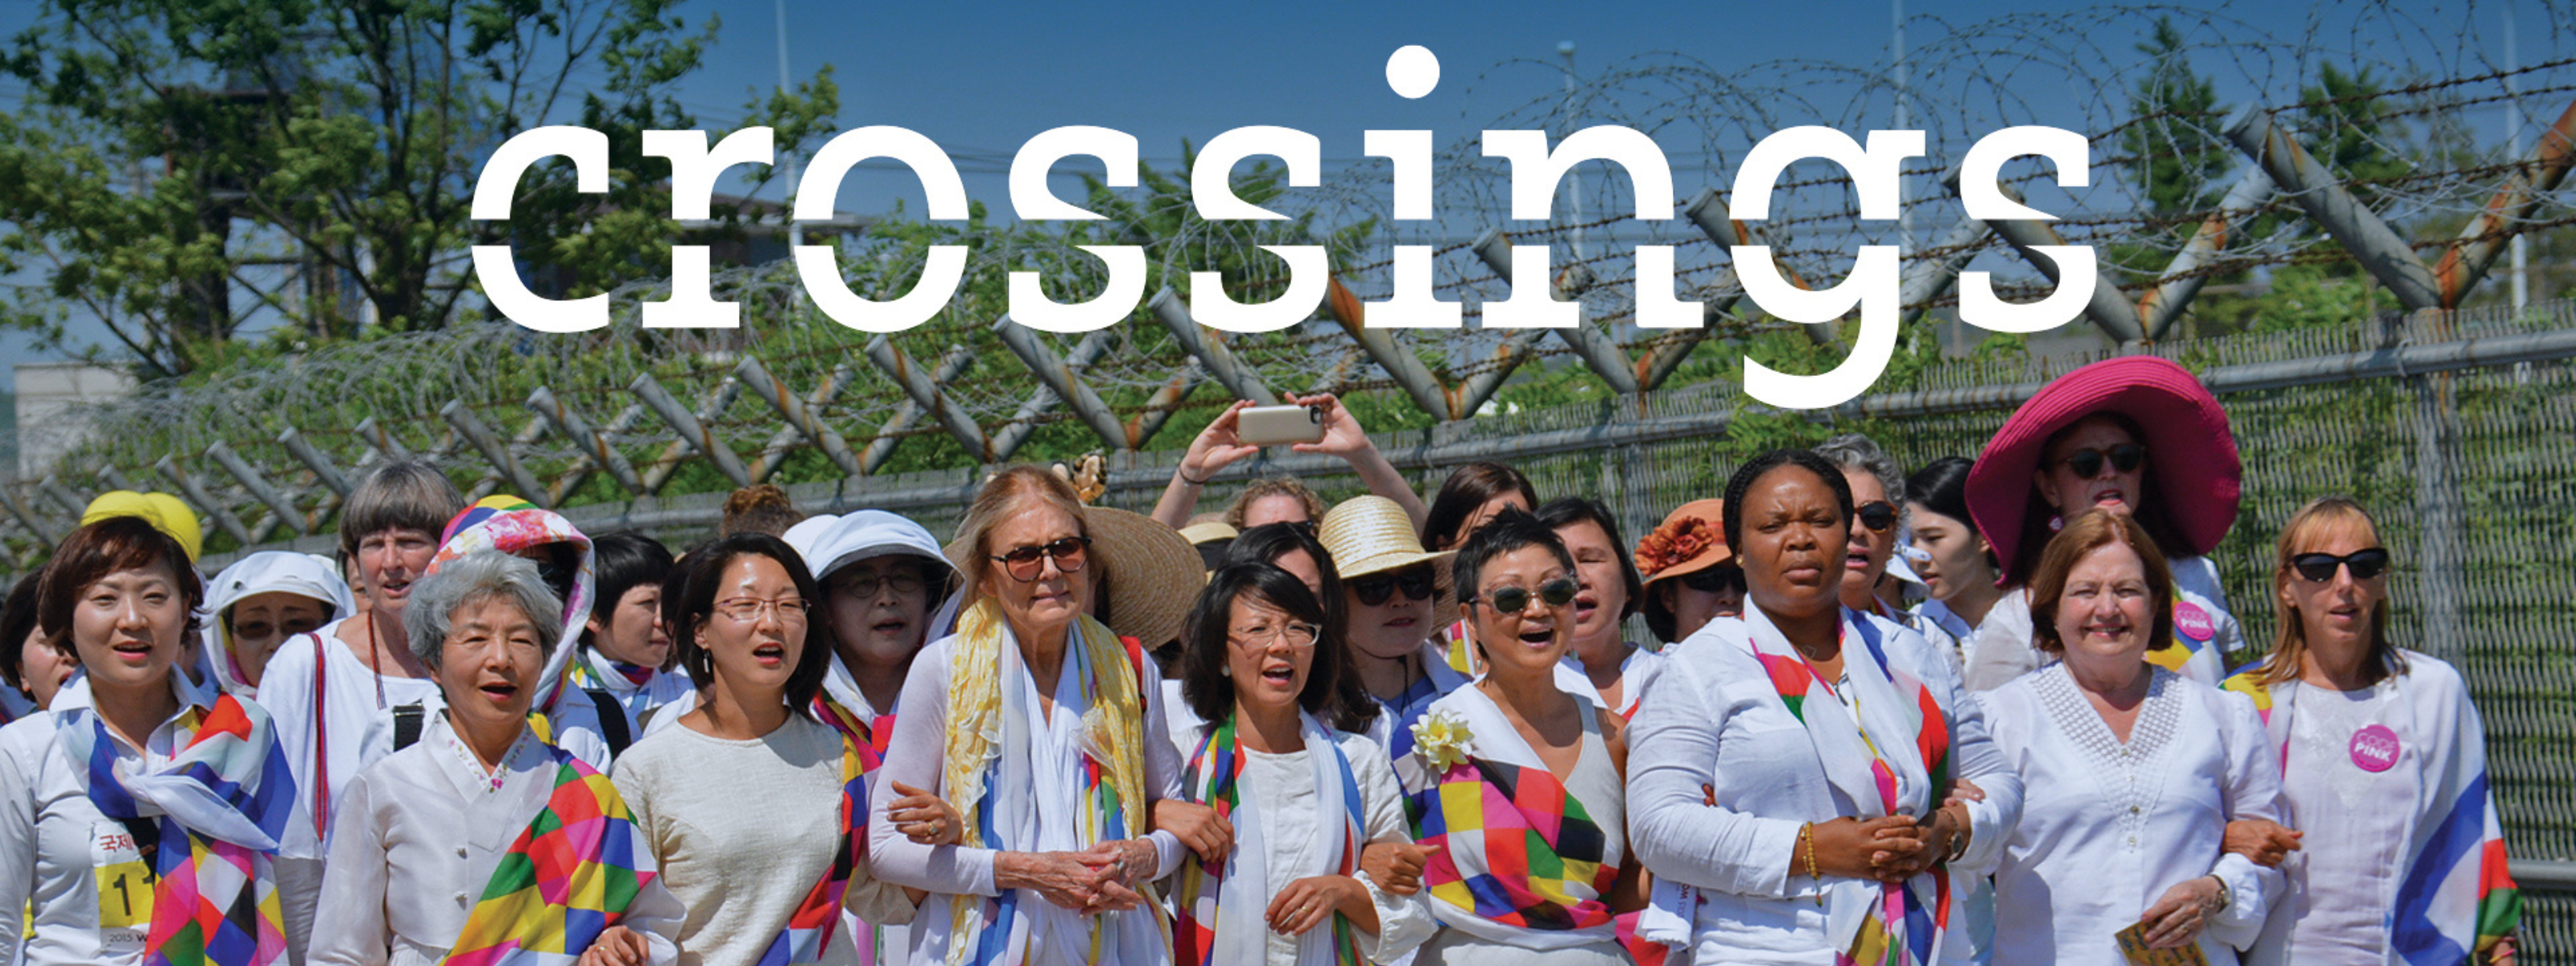 Image from the Crossings documentary featuring a group of several women walking together with their arms interlocked during a peaceful protest march. 